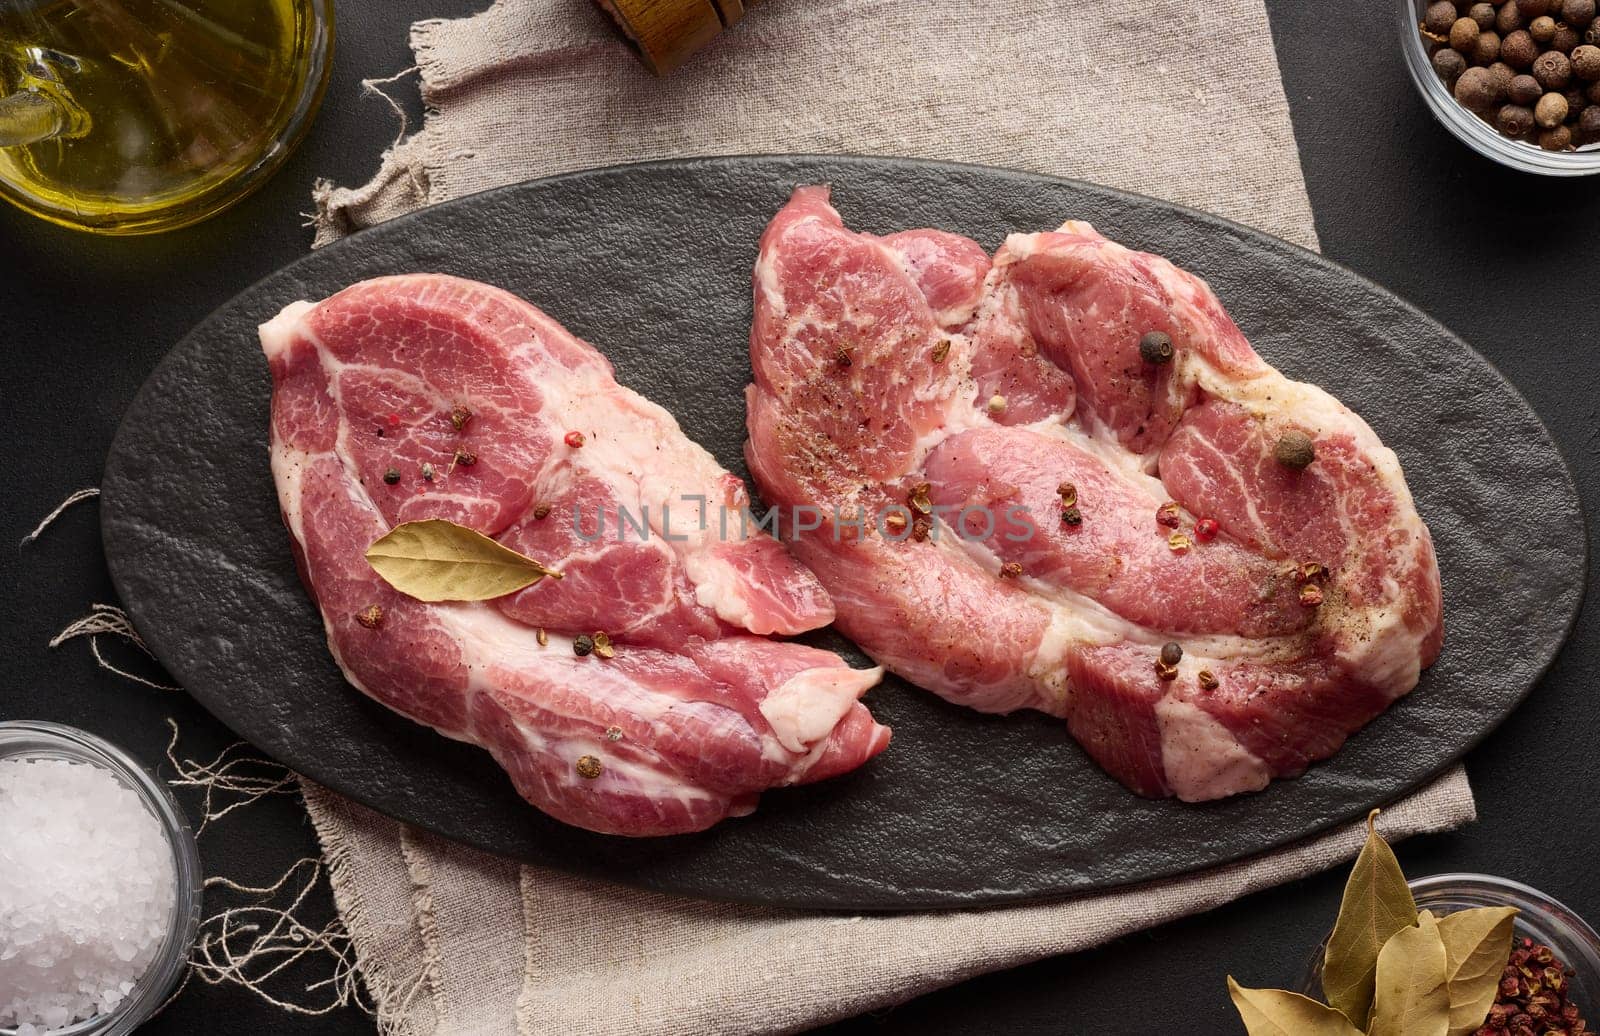 Two raw pork neck steaks on a board and spices for cooking. Top view of black table